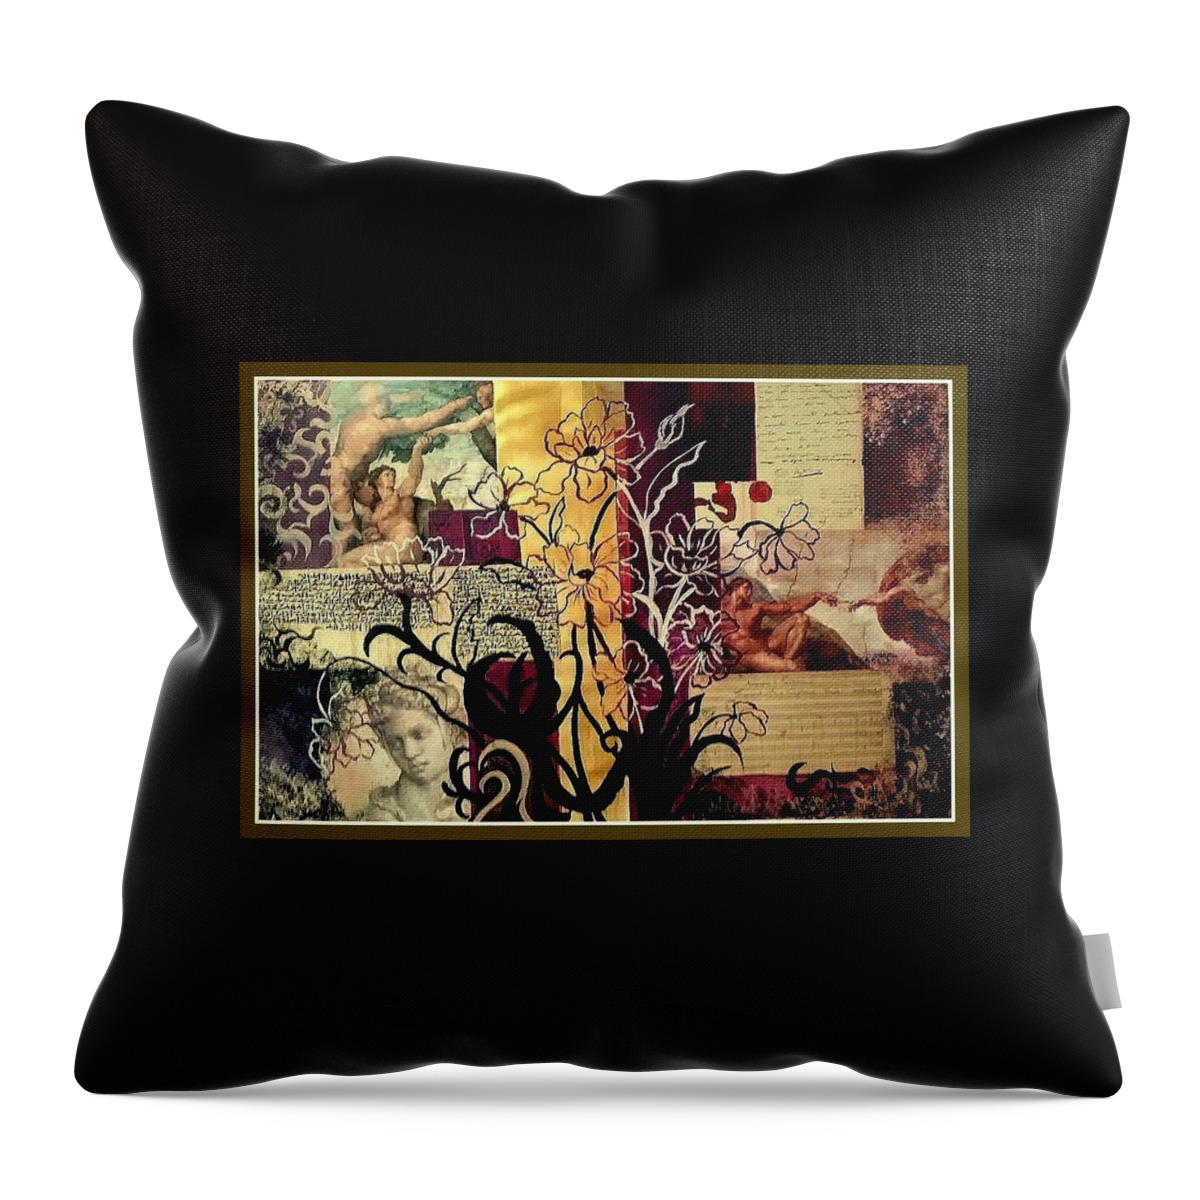 Collage Throw Pillow featuring the painting Michelangelo Collage by Patricia Rachidi